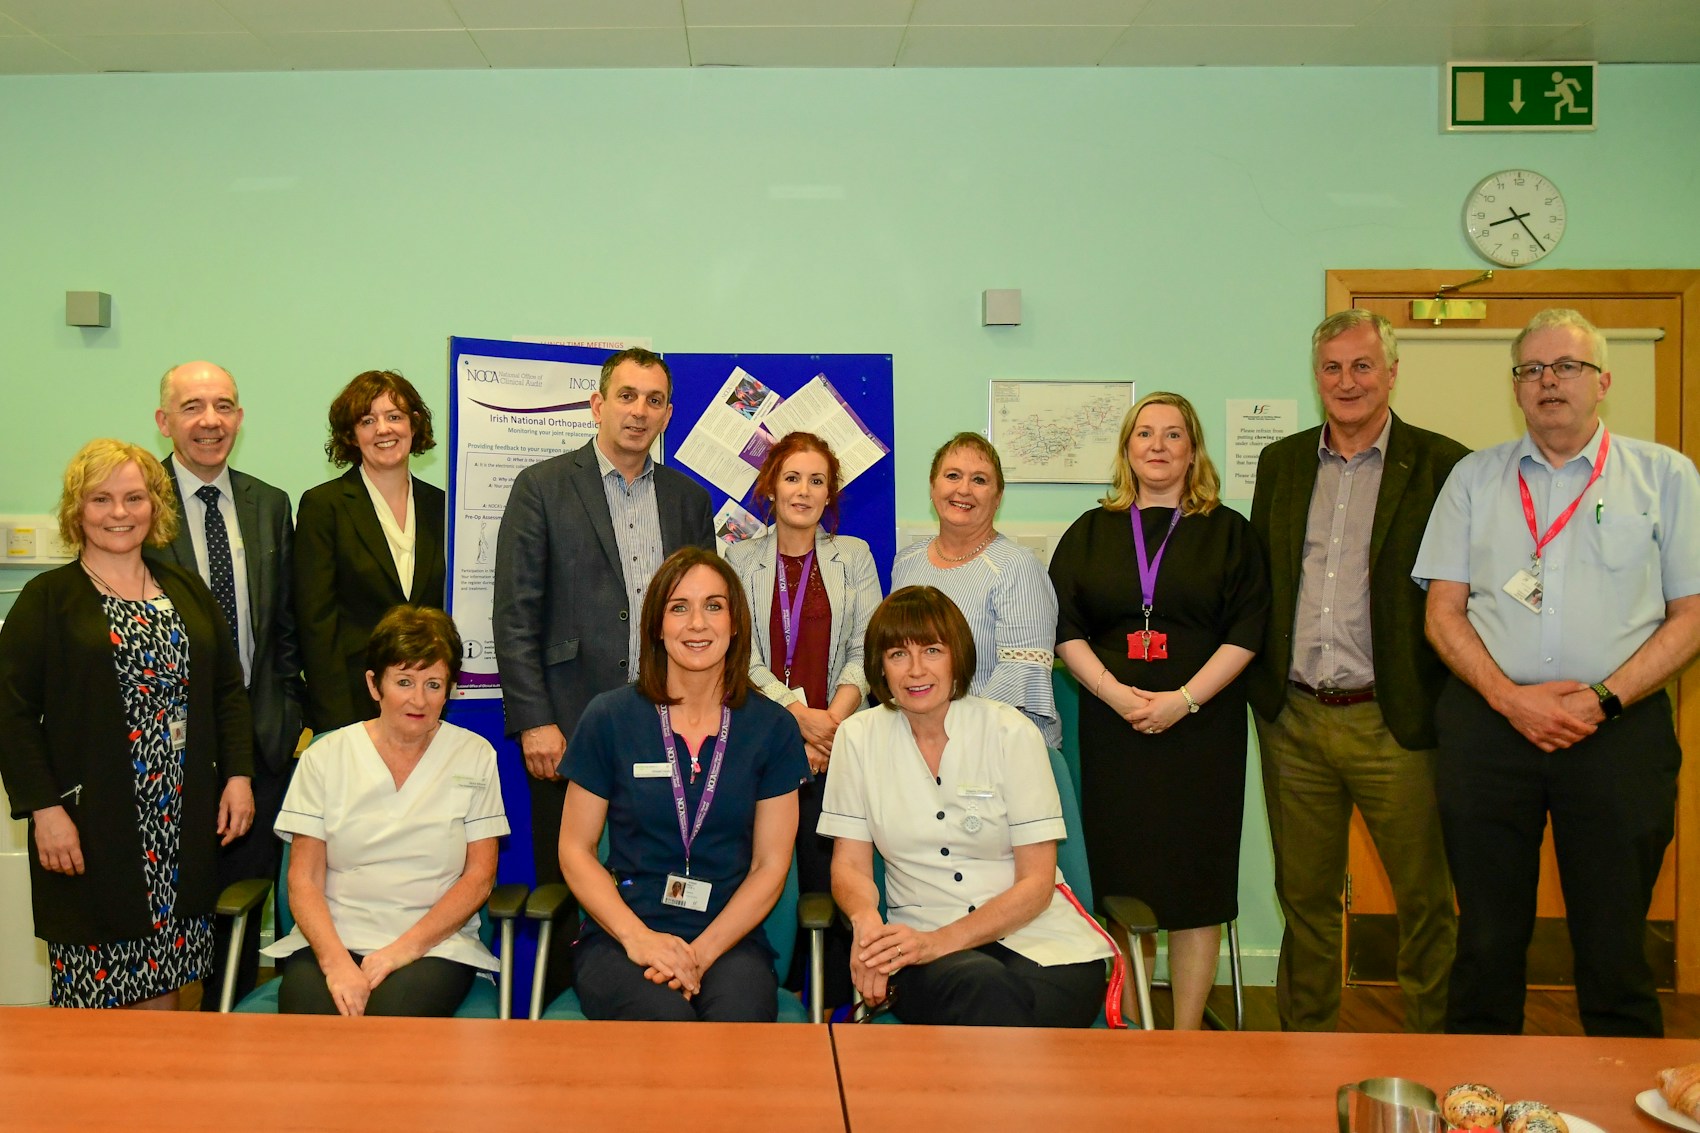 University Hospital Kerry becomes the 8th hospital live on INOR